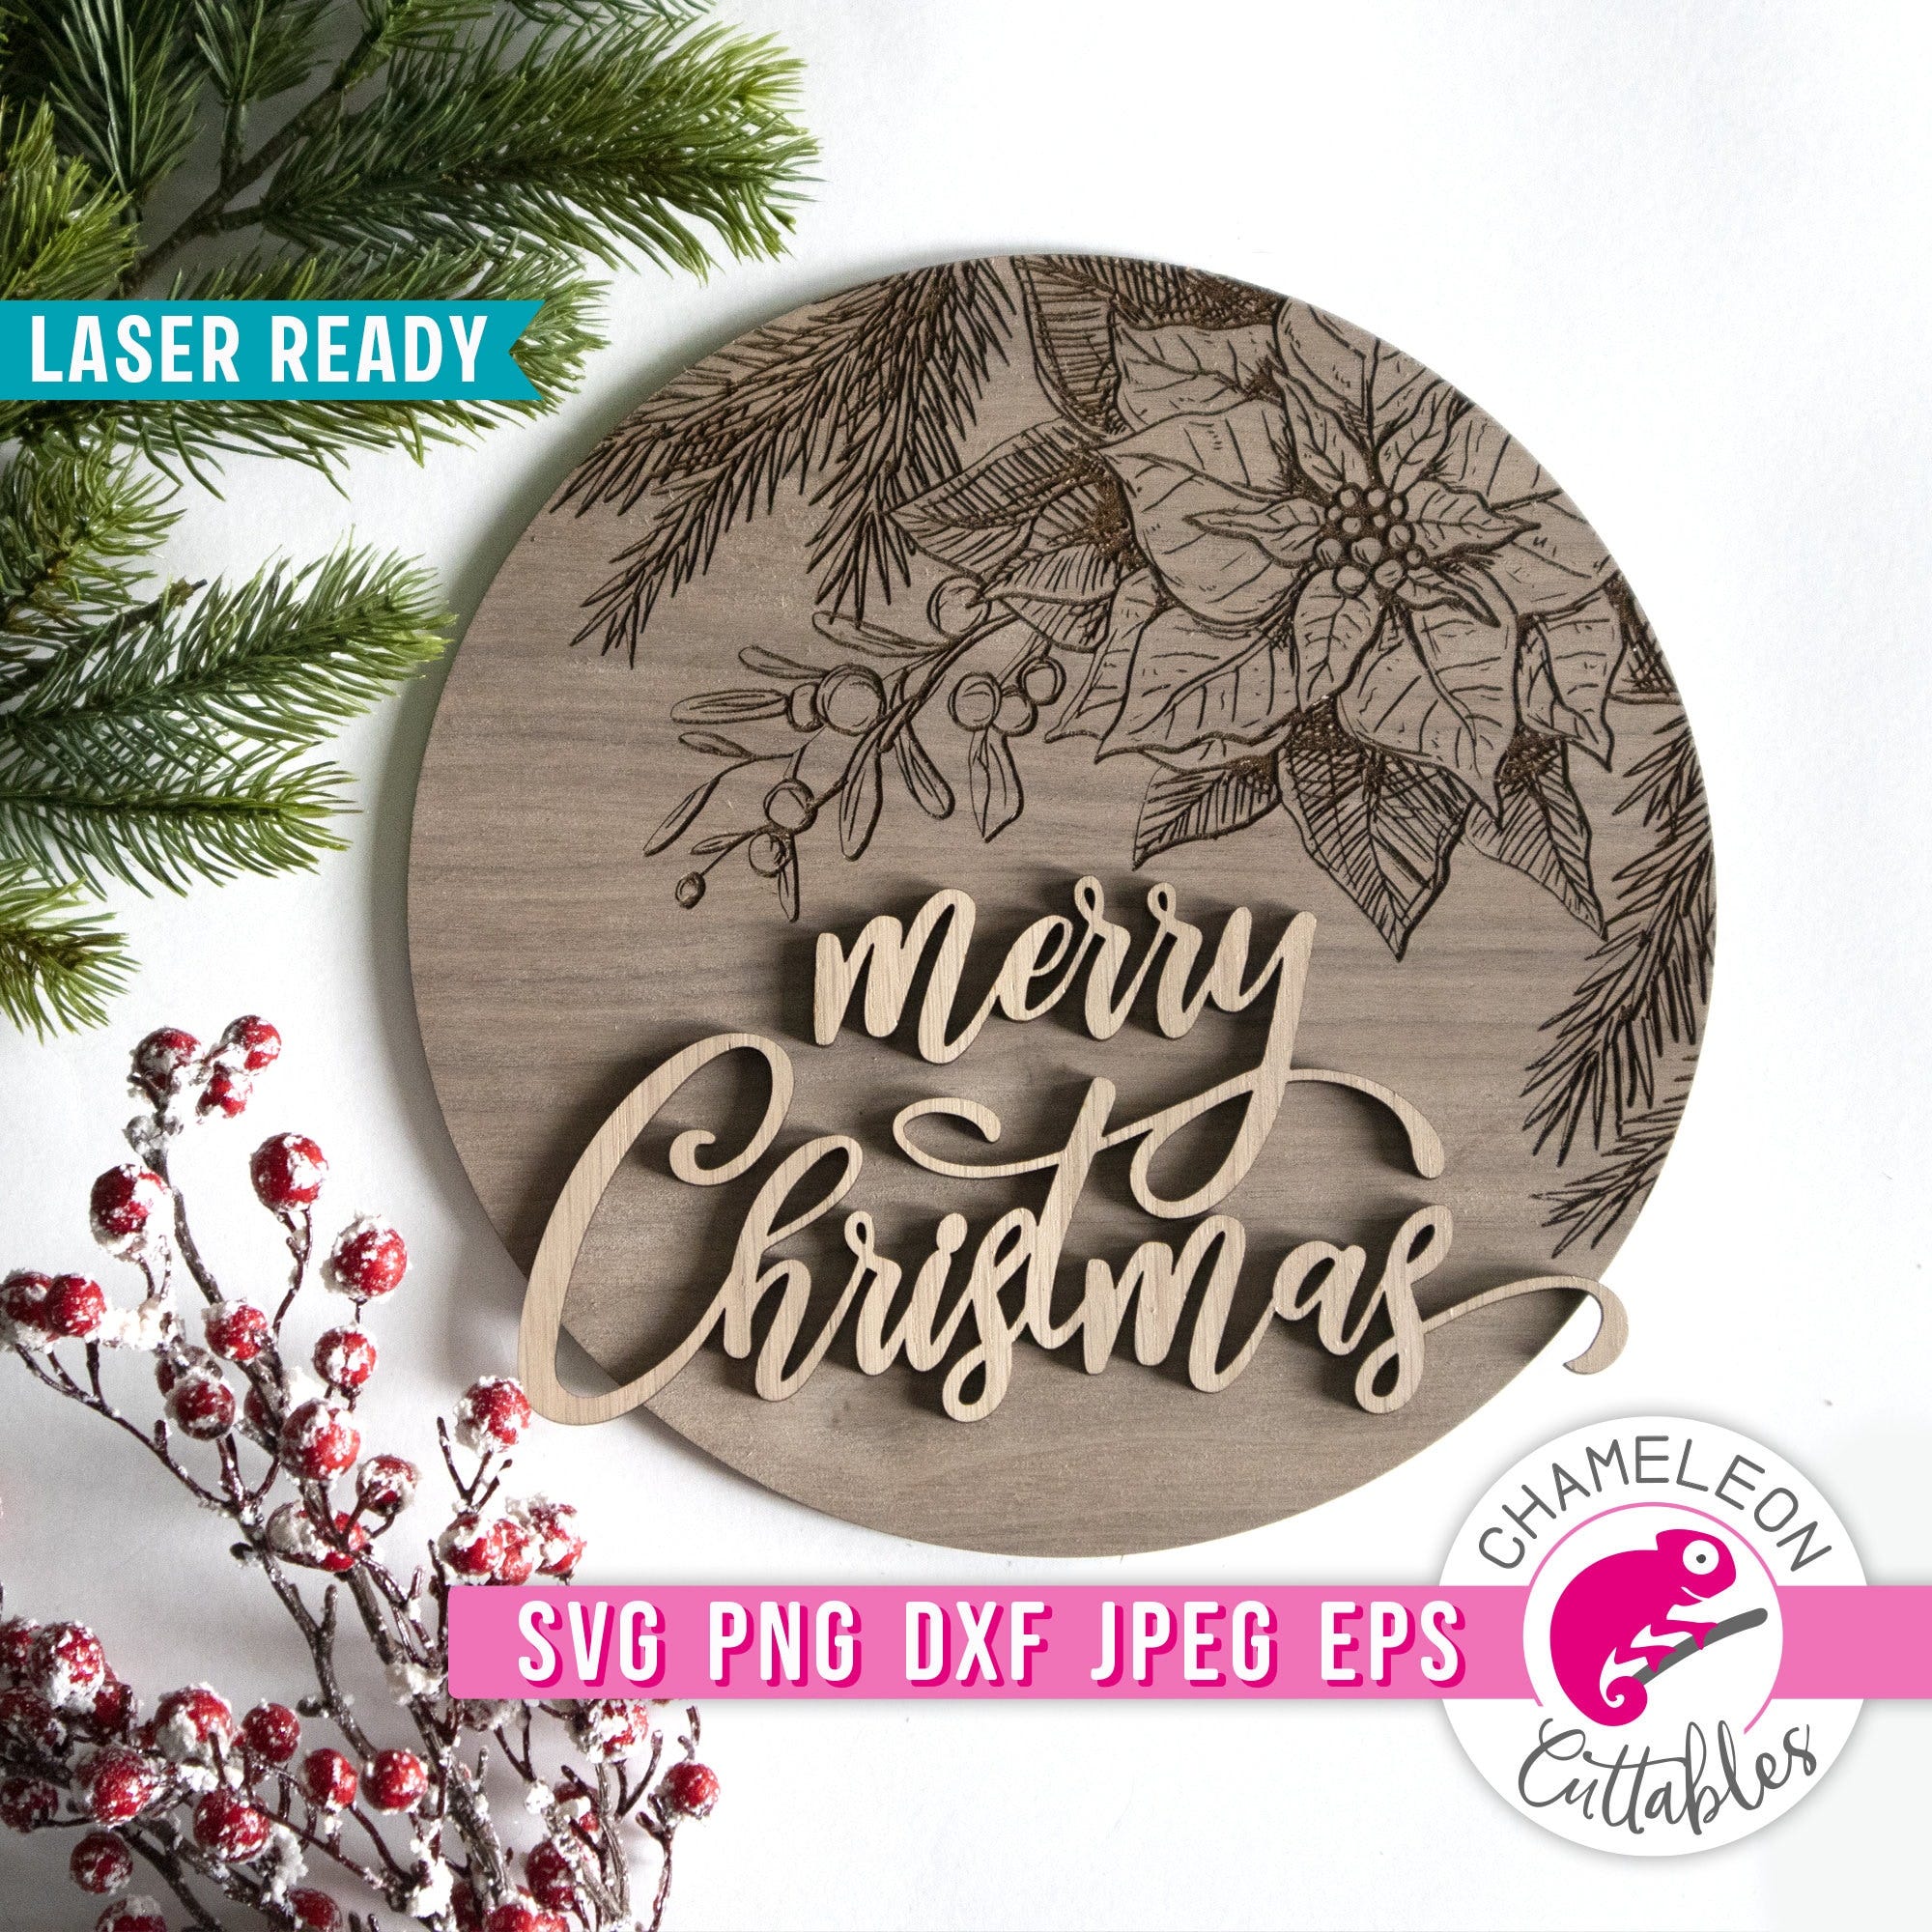 SVG, PNG, DXF, Jpeg, Christmas sign svg with hand drawn Poinsettia graphic for laser cutters, Glowforge  file, Thunder file, Digital Design